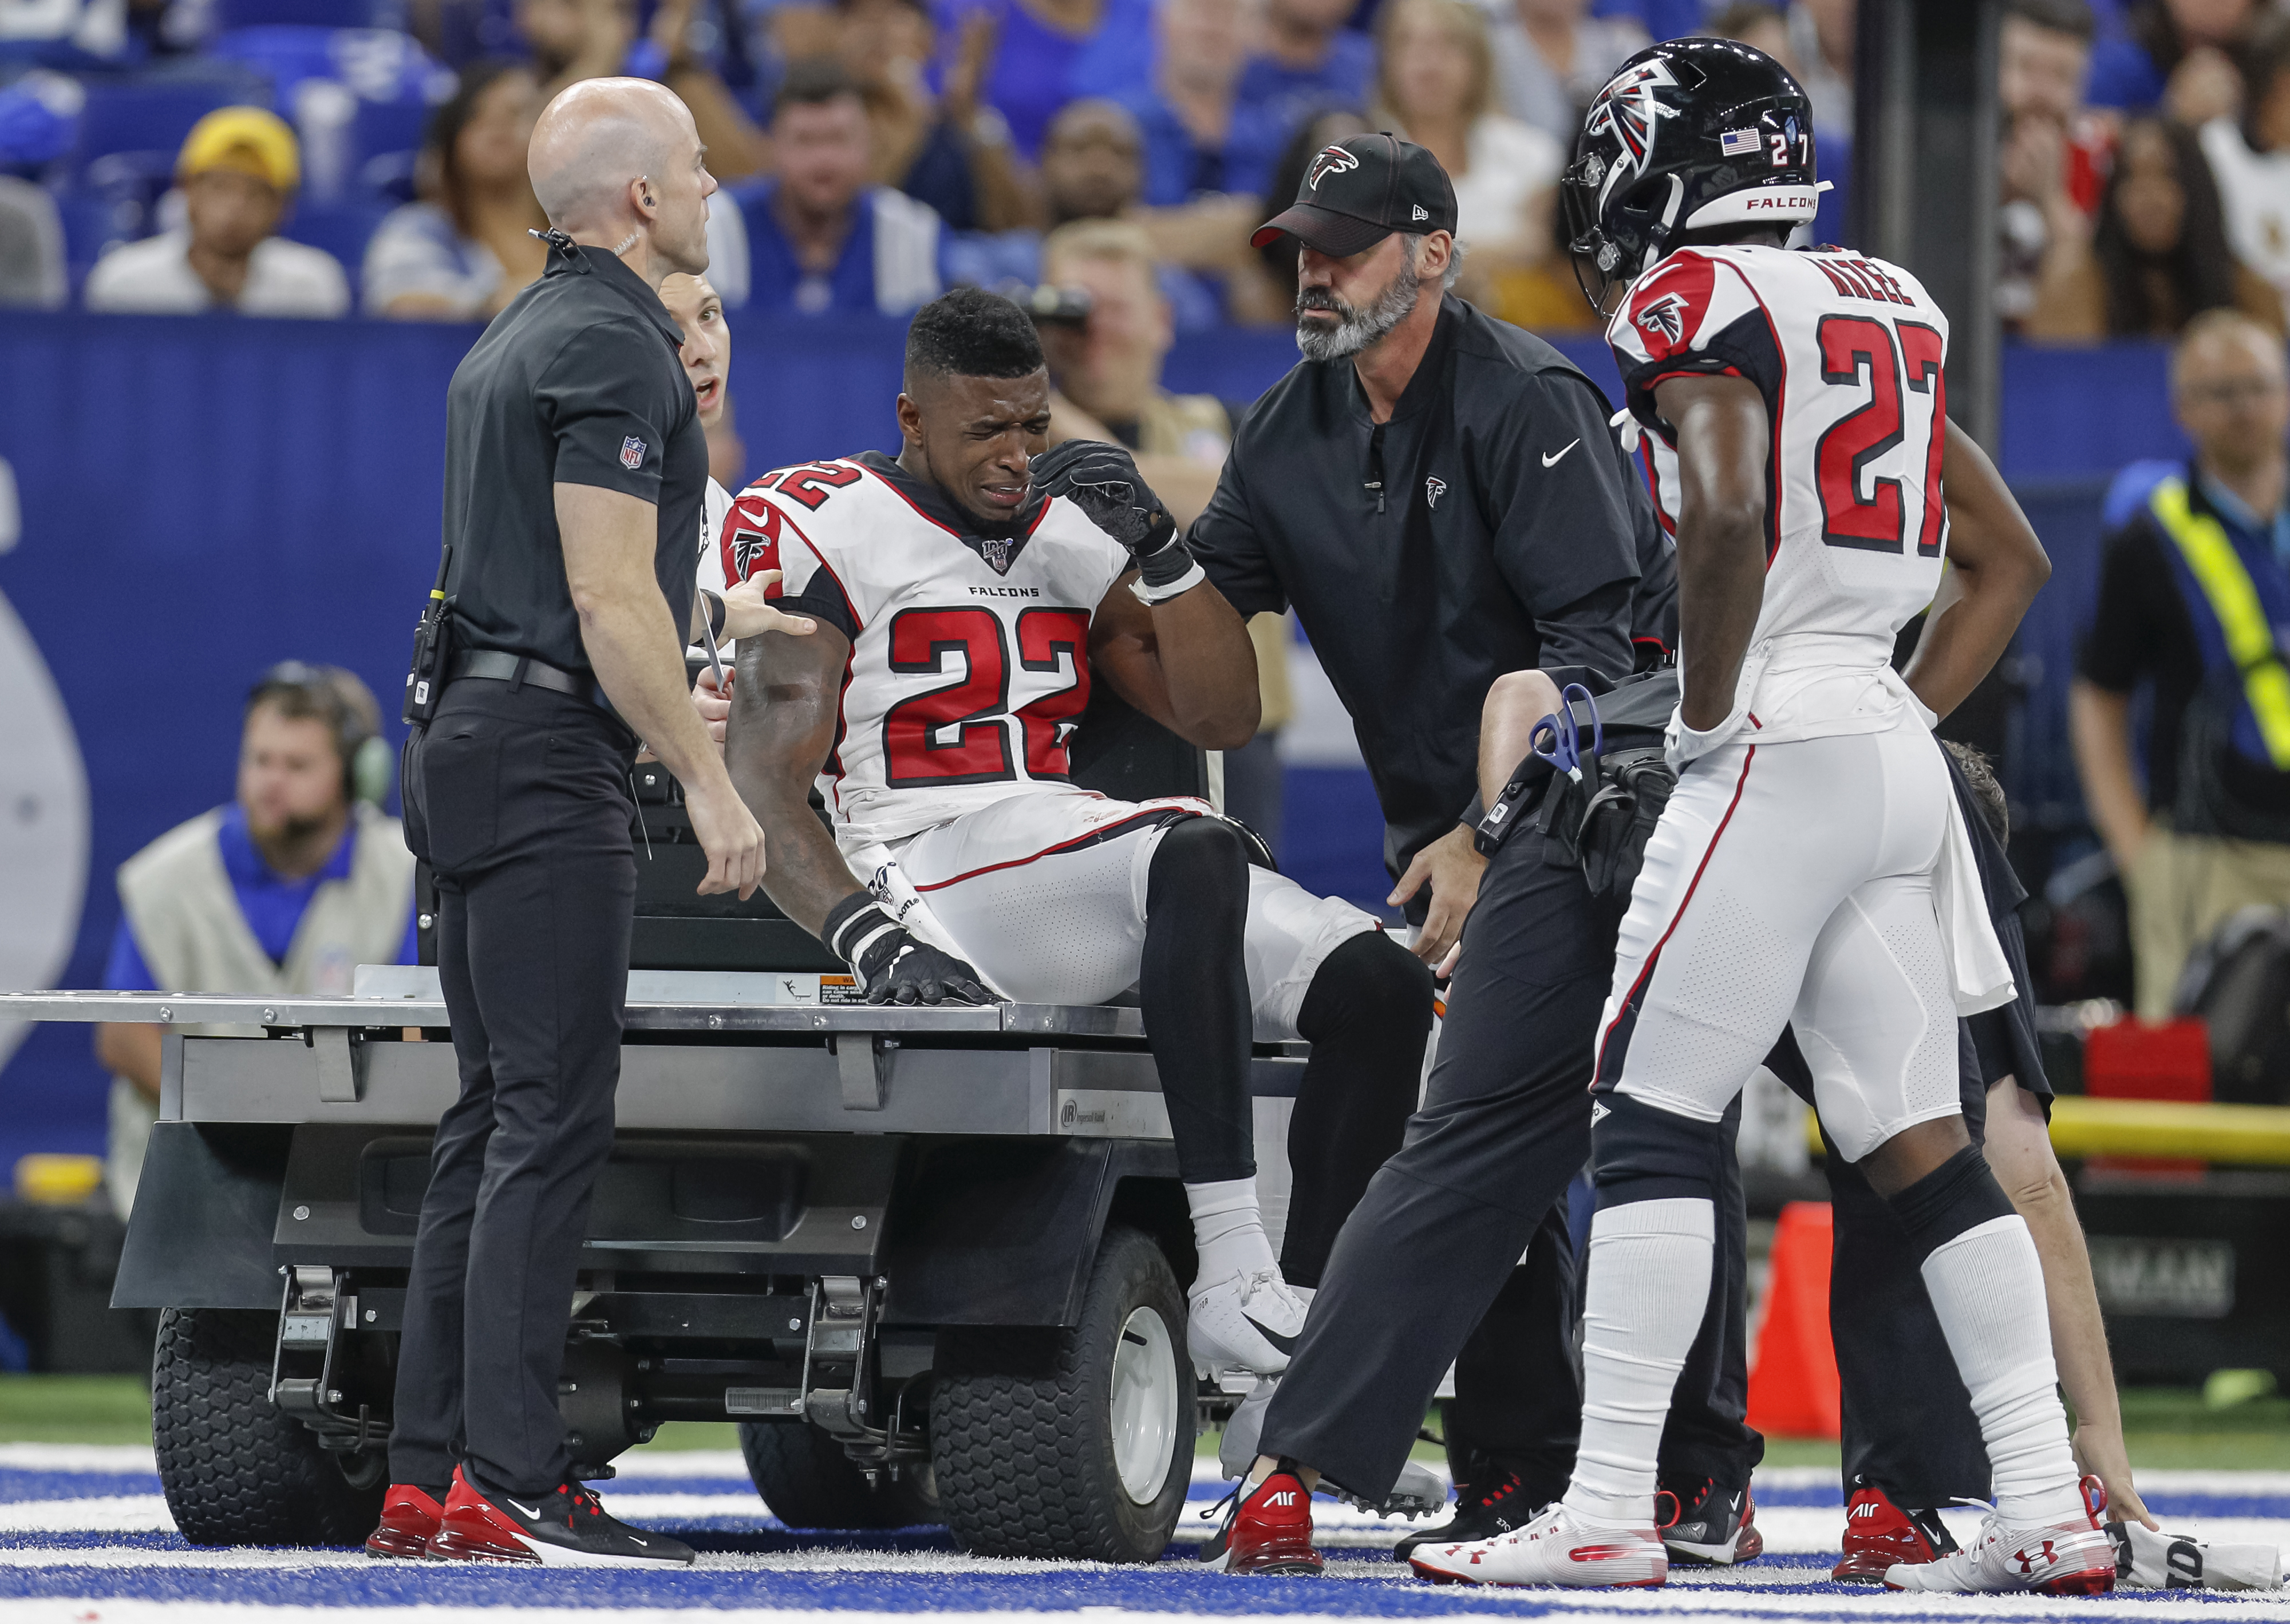 NFL Refs Called A Terrible Penalty On Falcons' Keanu Neal As He Laid In